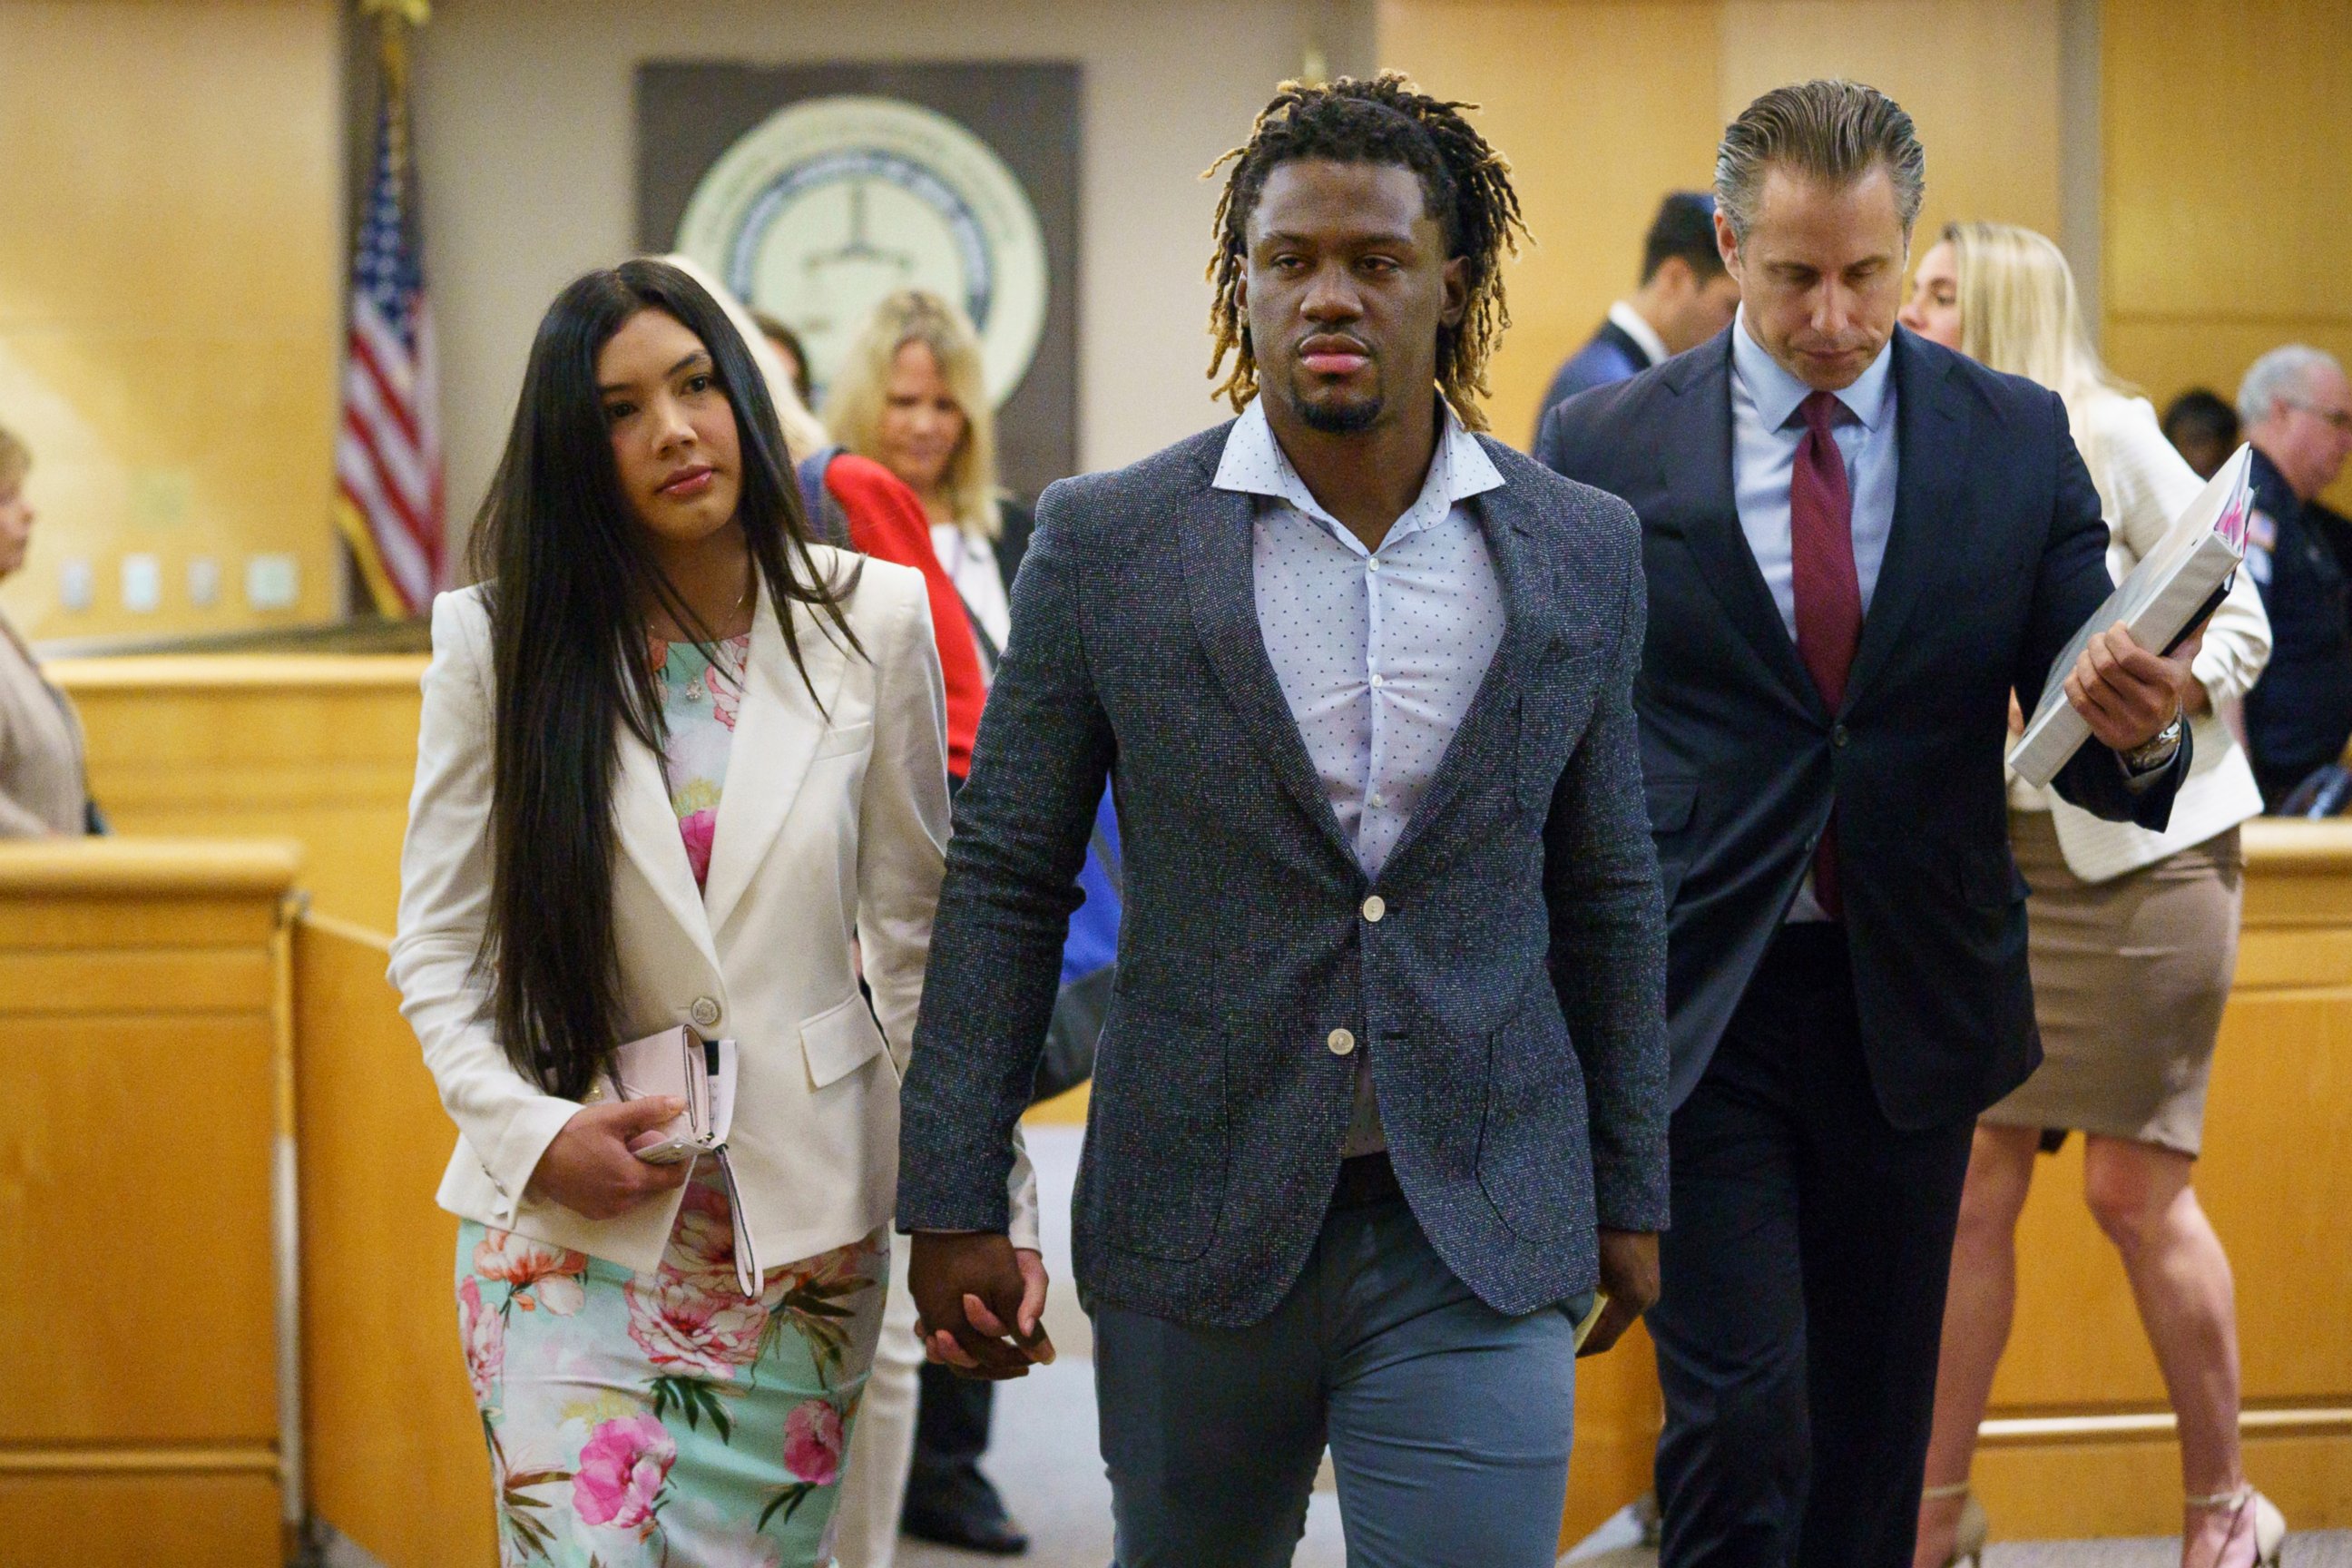 PHOTO: Philadelphia Phillies baseball player Odubel Herrera leaves a courtroom with an unidentified friend after a hearing on a domestic violence case in Atlantic City, N.J., Wednesday, July 3, 2019.